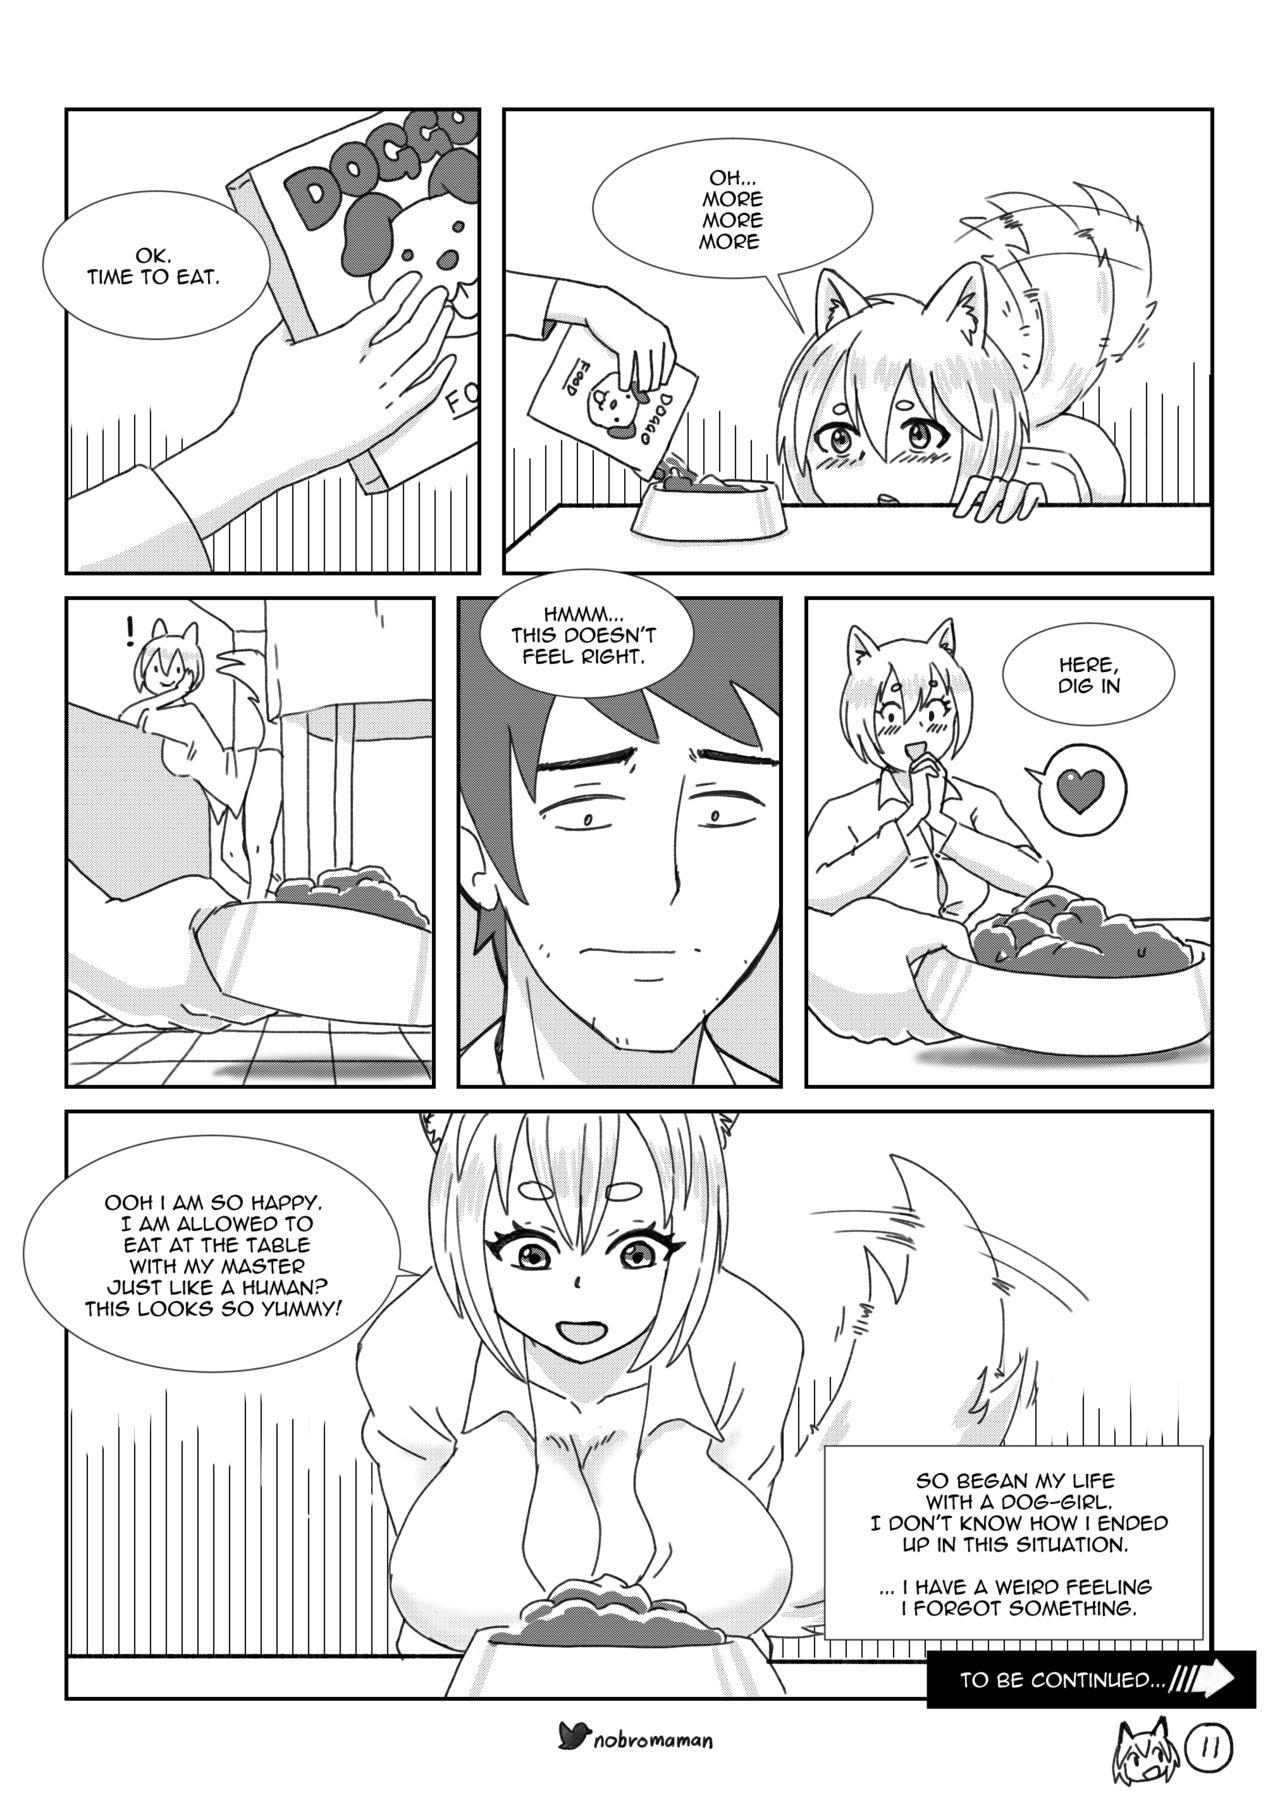 Backshots Life with a dog girl - Chapter1 Hot Mom - Page 12